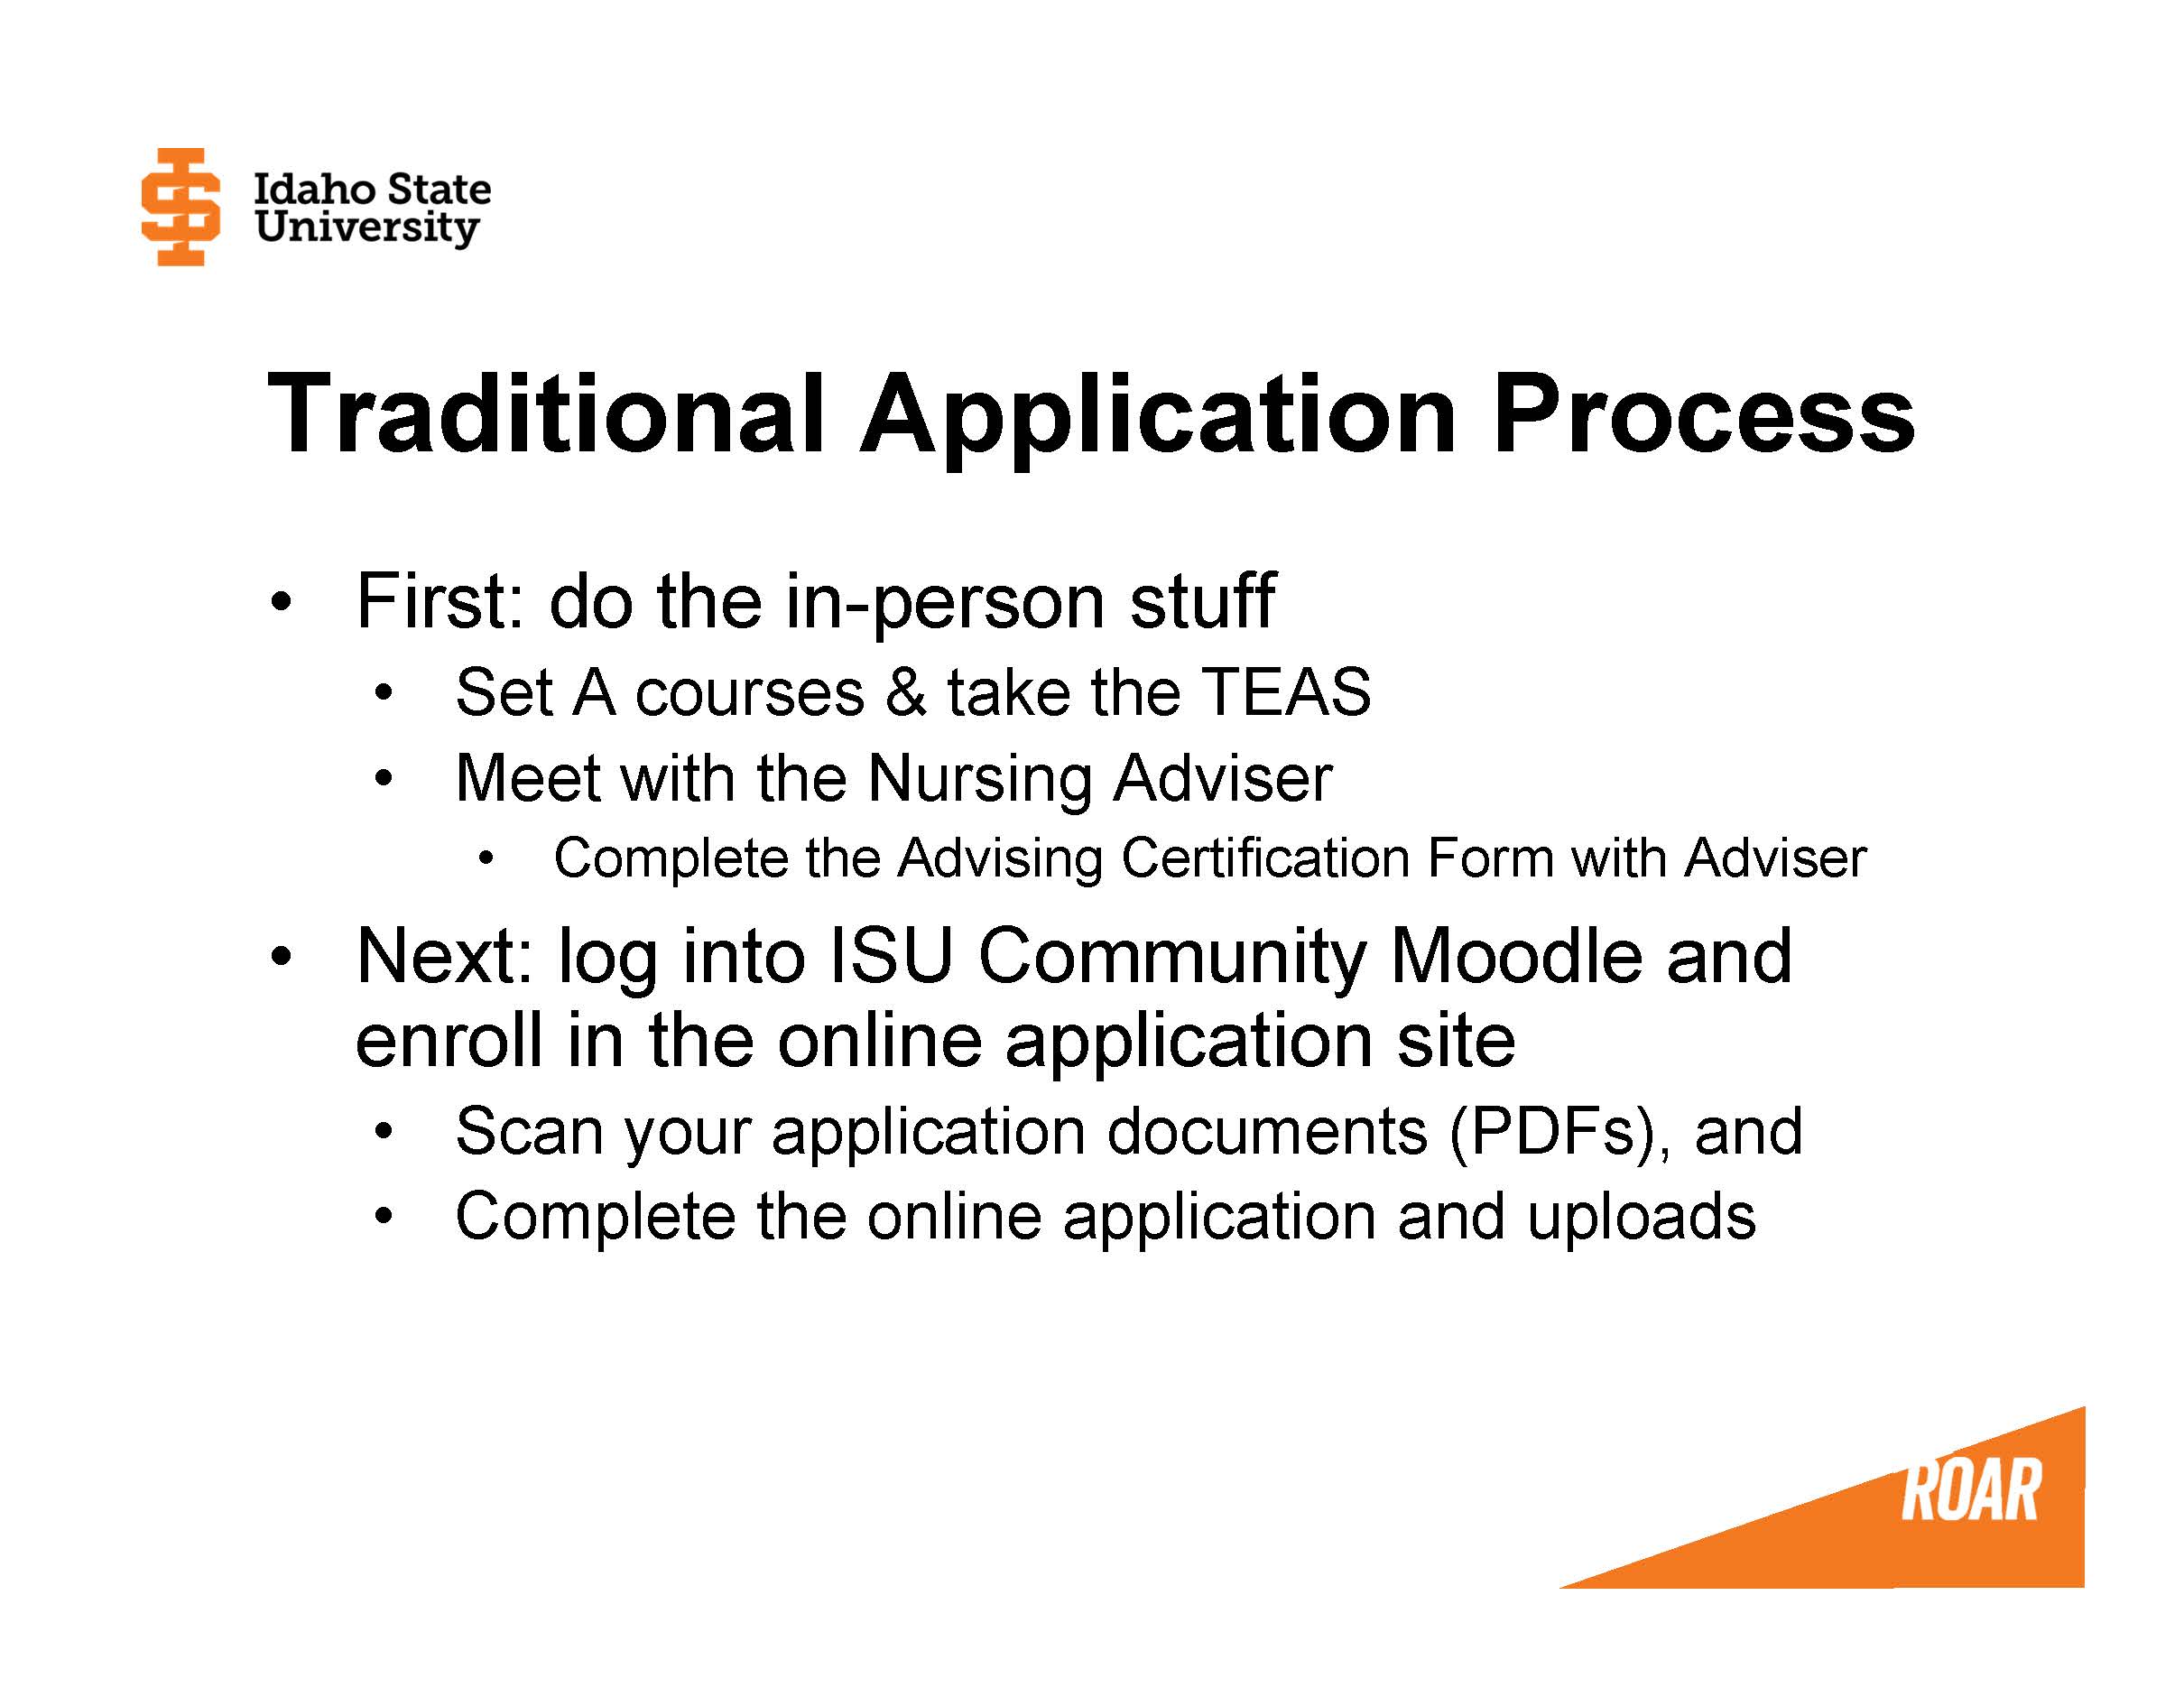 First: do the in-person stuff Set A courses & take the TEAS Meet with the Nursing Adviser Complete the Advising Certification Form with Adviser Next: log into ISU Community Moodle and enroll in the online application site Scan your application documents (PDFs), and  Complete the online application and uploads